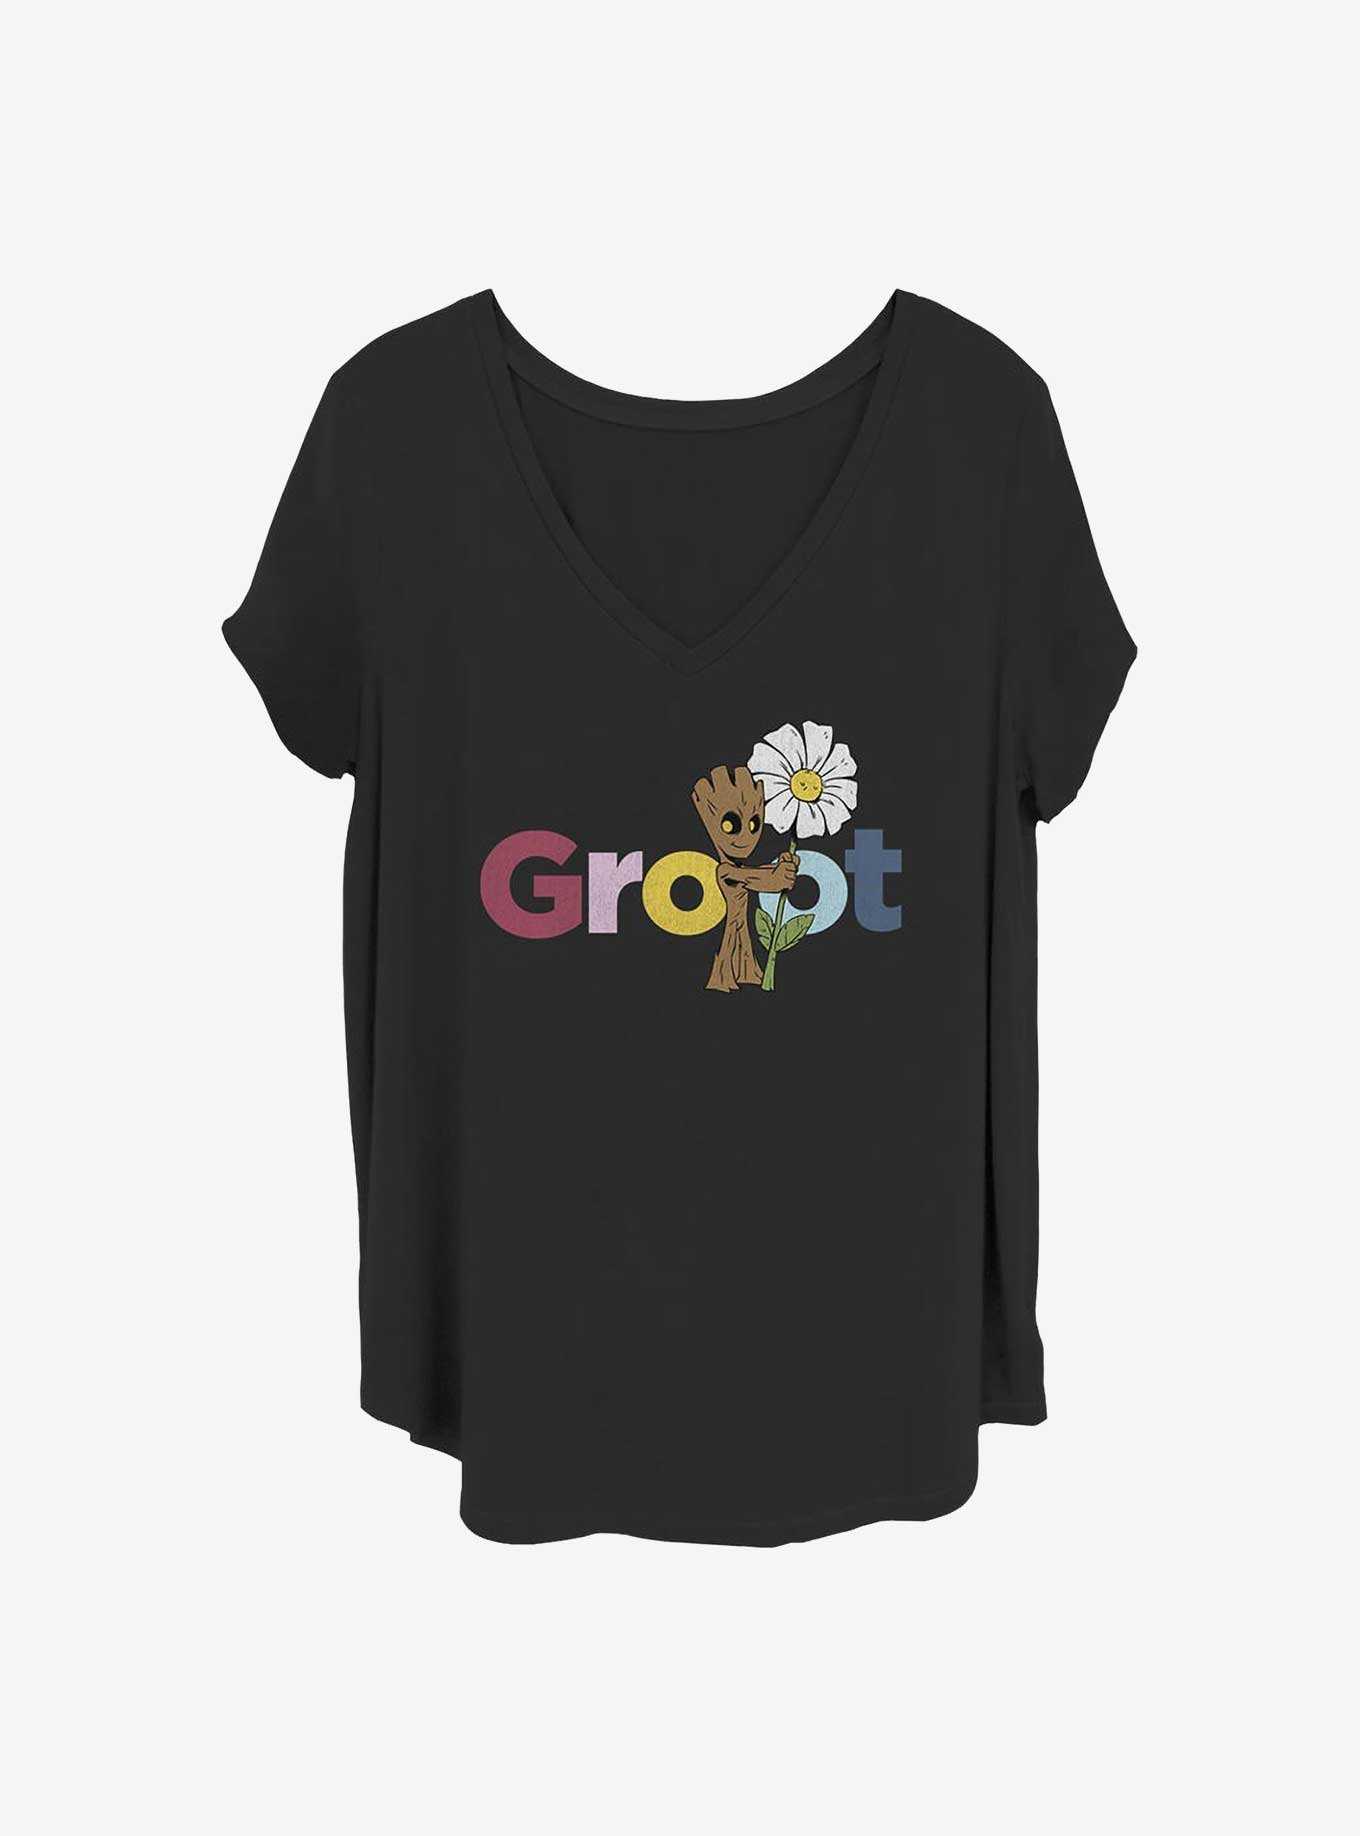 Marvel Guardians of the Galaxy Groot Girls T-Shirt Plus Size, , hi-res